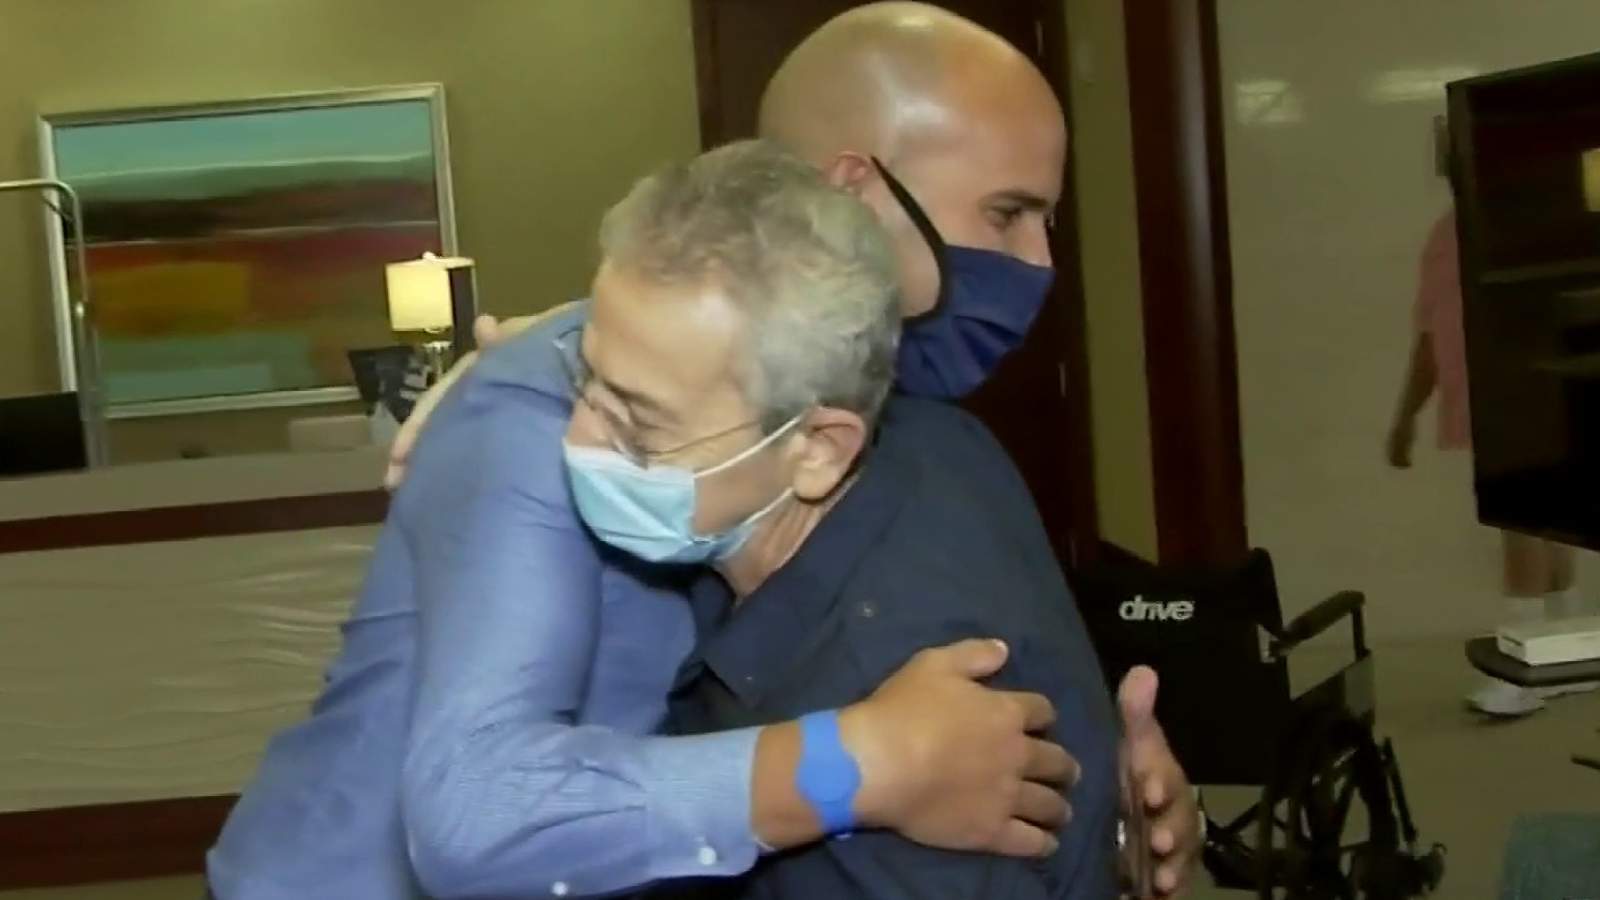 ‘I thank God for sending me an angel:’ Man reunites with Orlando hotel worker who saved his life